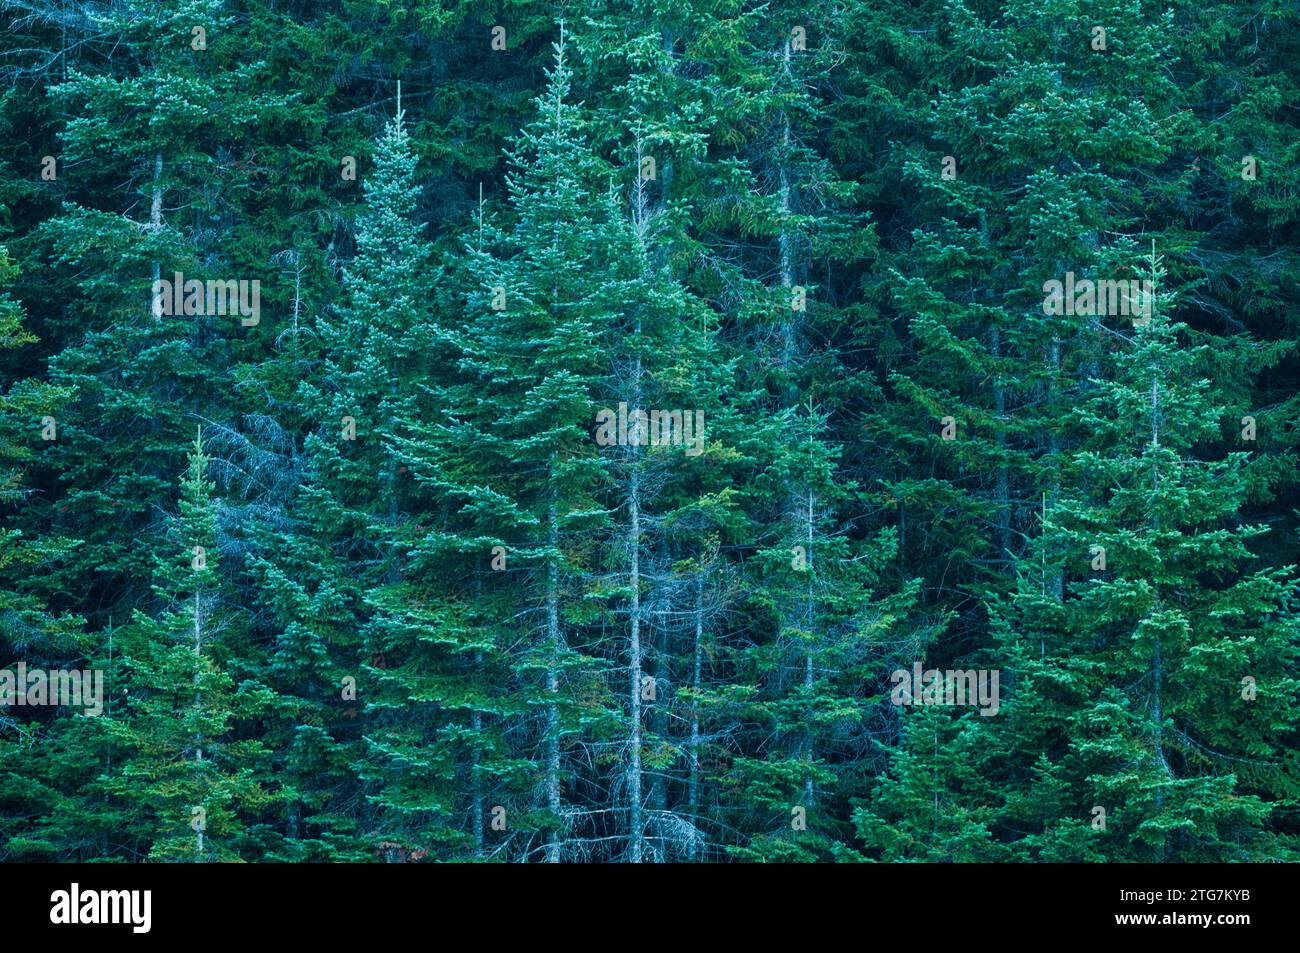 Balsam Fir (Abies balsamea) which is an evergreen tree growing in the West Canada Lake Wilderness Area in the Adirondack Forest Preserve in New York S Stock Photo